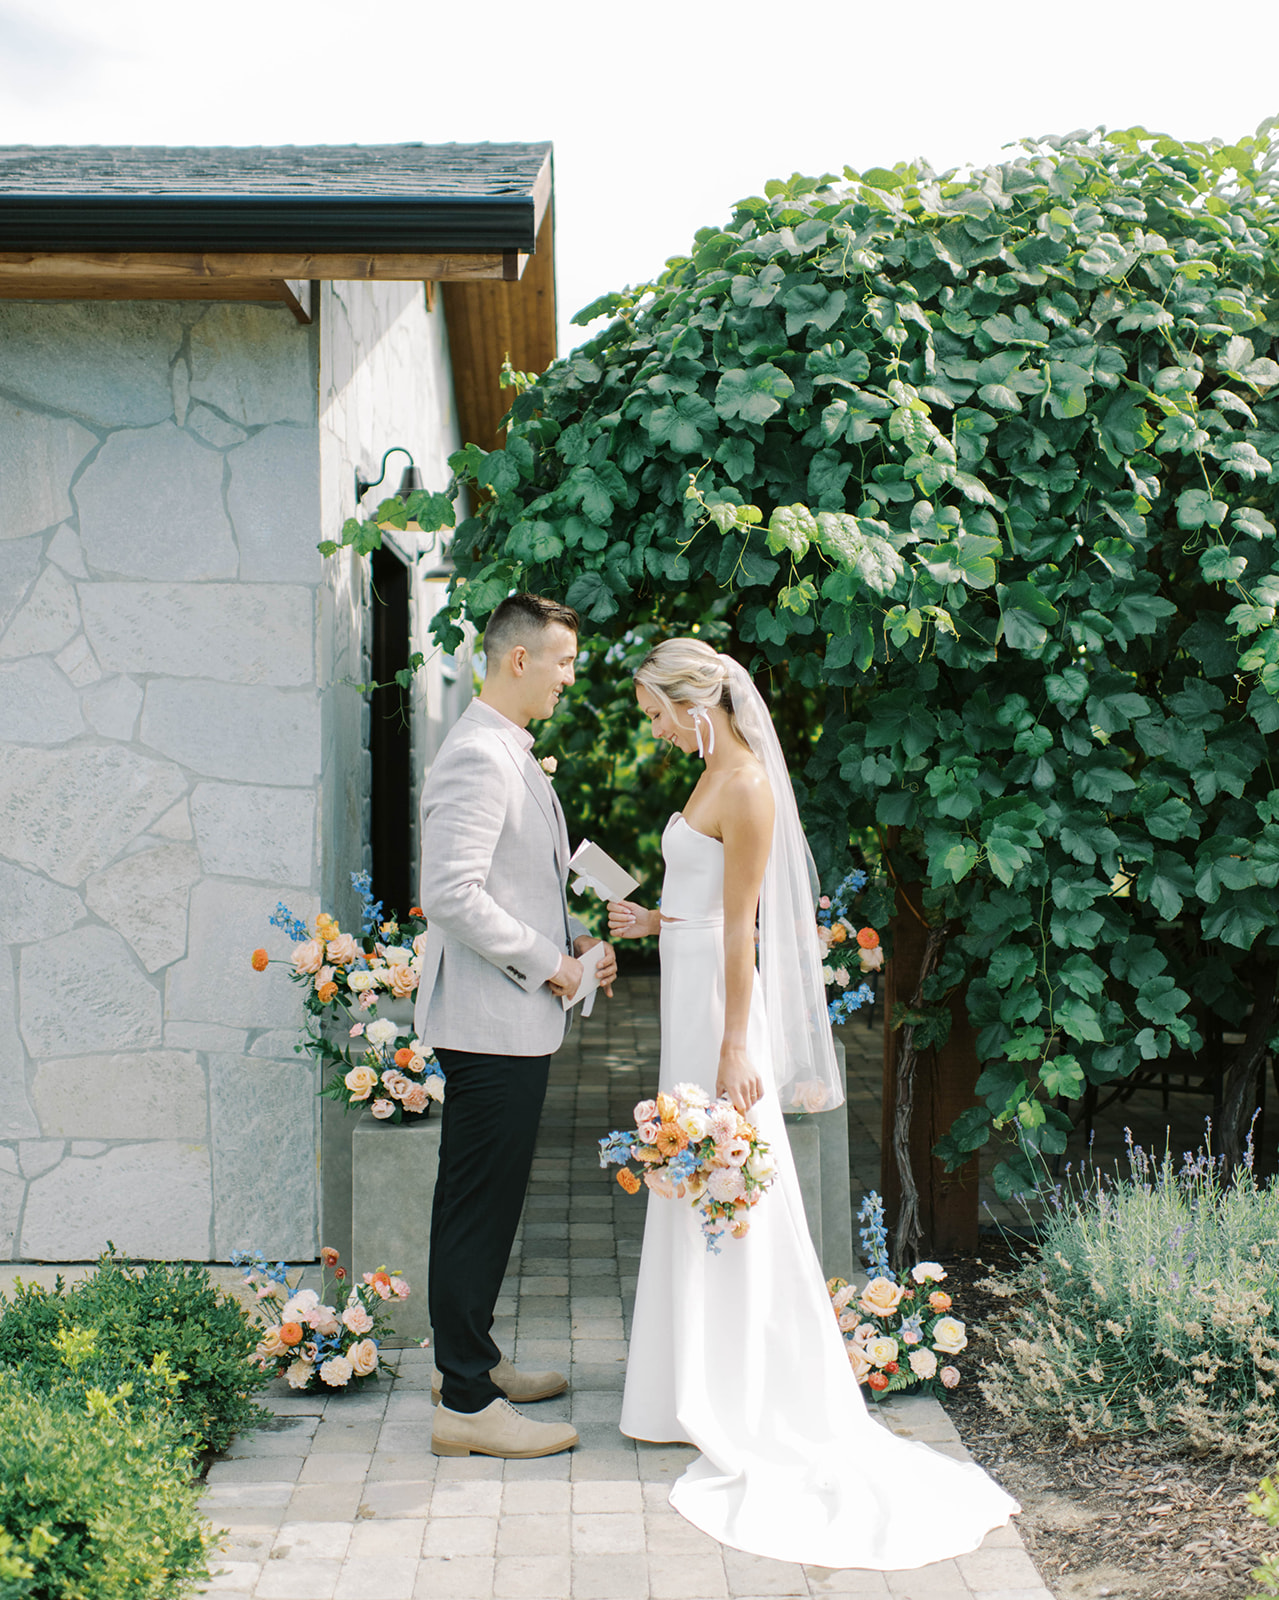 Stunning pedestal arch arrangement adorned with orange and blue summer wedding florals, creating an elegant backdrop for ceremony, Okanagan wedding at a Priest Creek Winery, couple dressed in modern and elegant wedding attire reading their vows to each other 